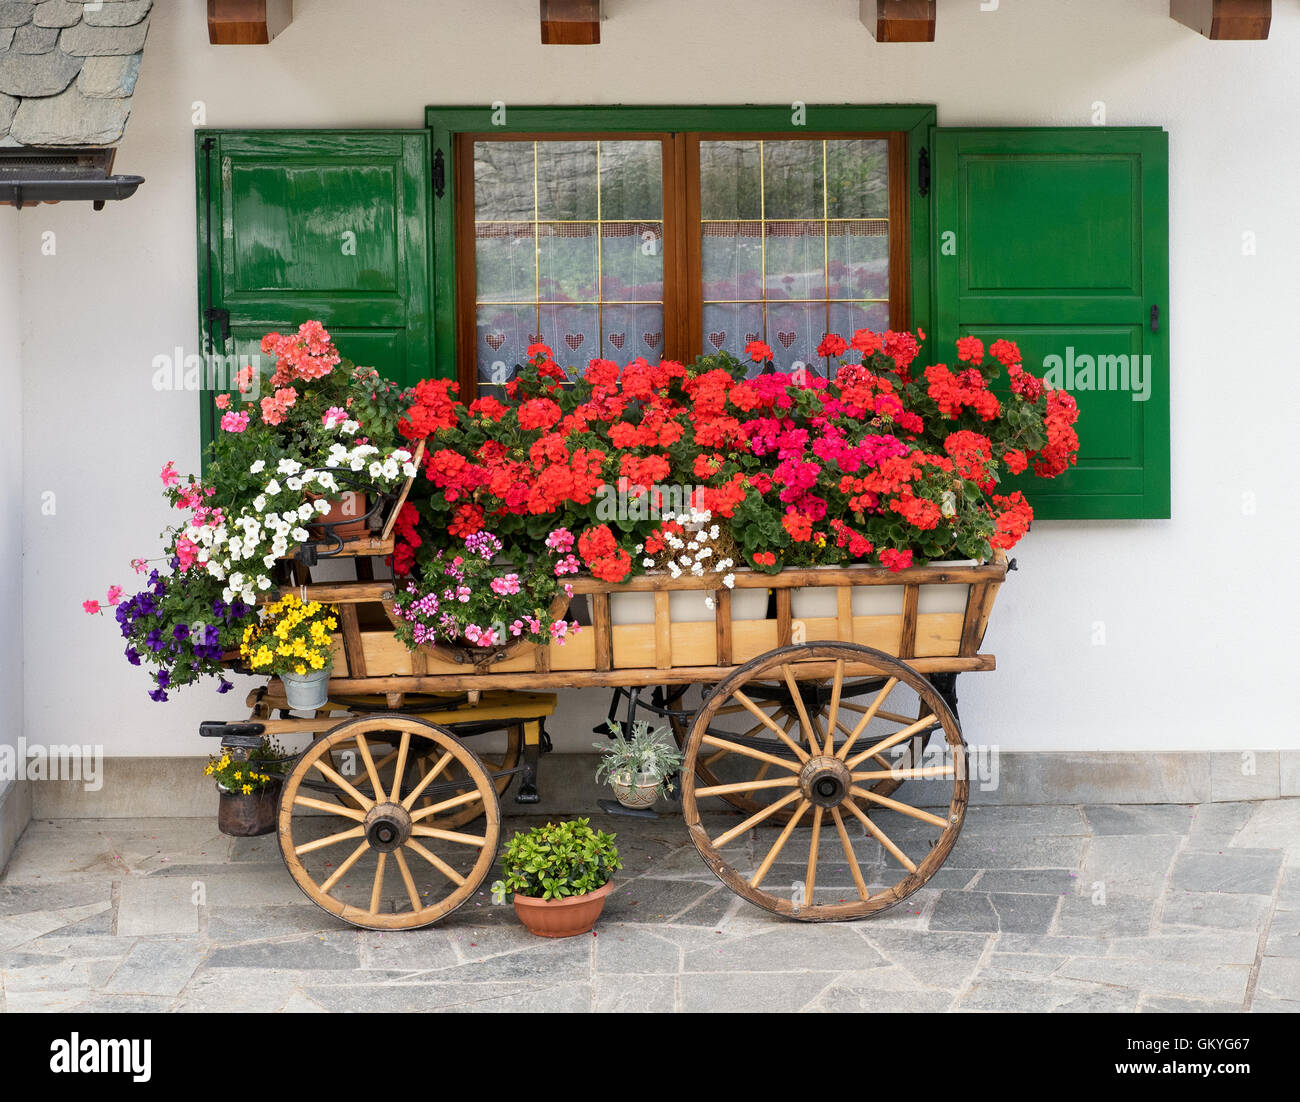 Decorative wooden cart filled with colorful summer flowers and potted plants Stock Photo